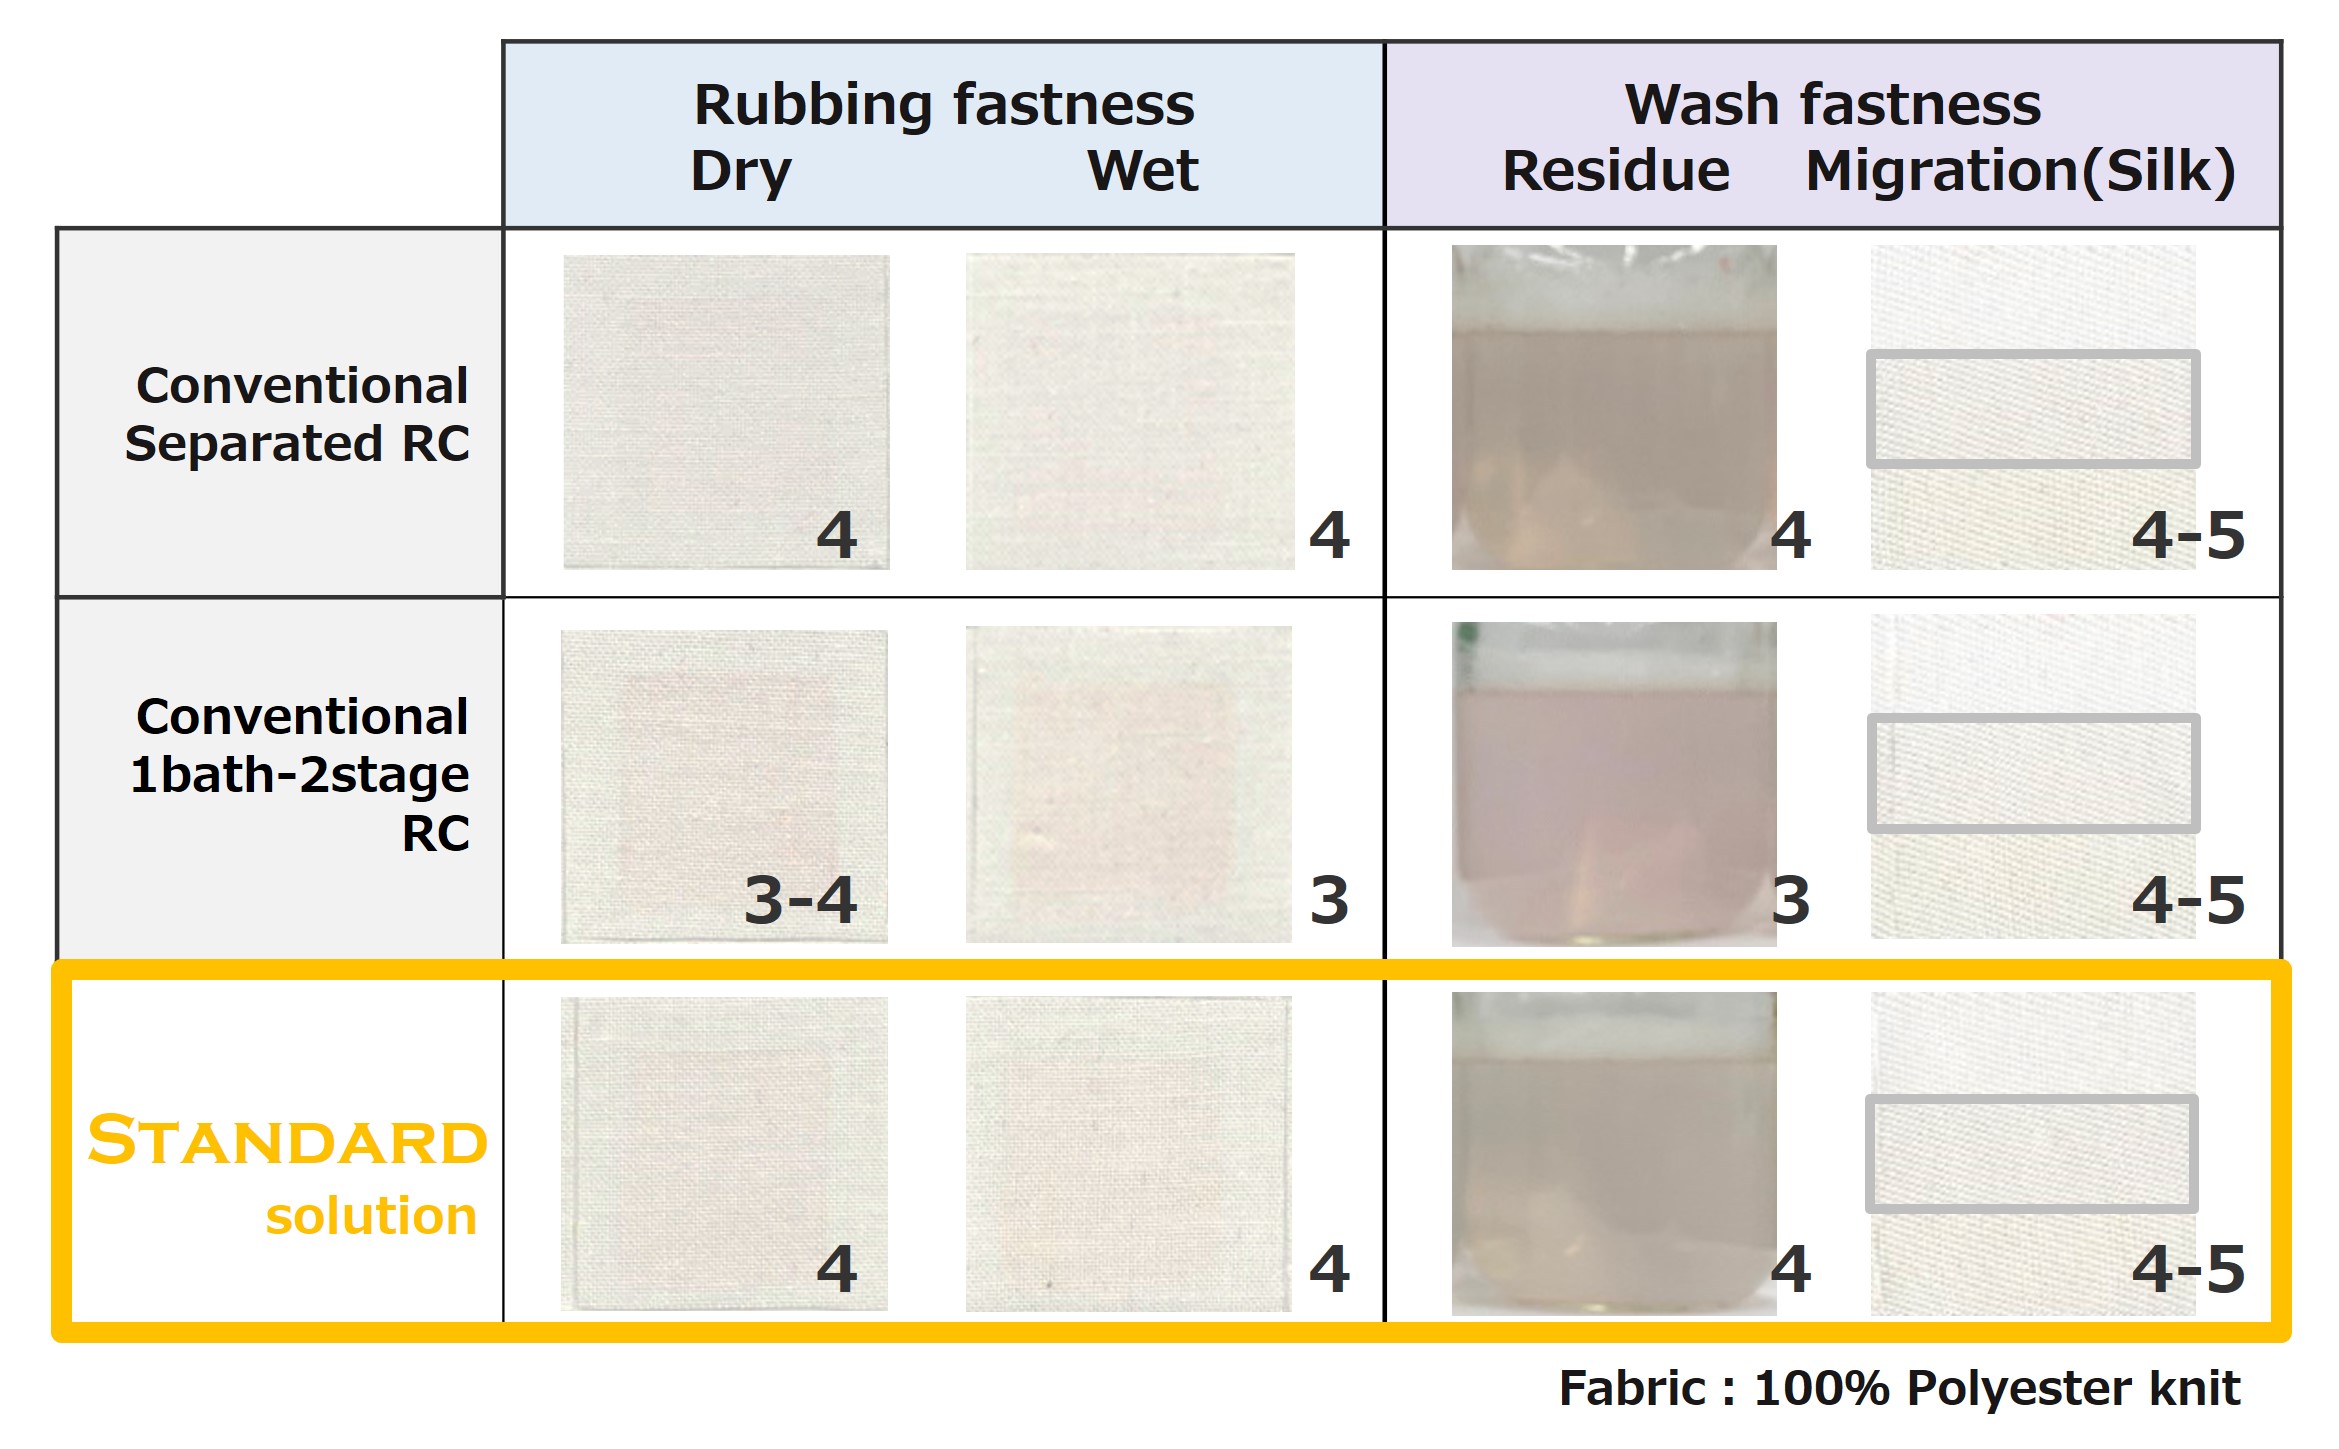 Rubbing fastness is level 4,and wash fastness is level 4-5